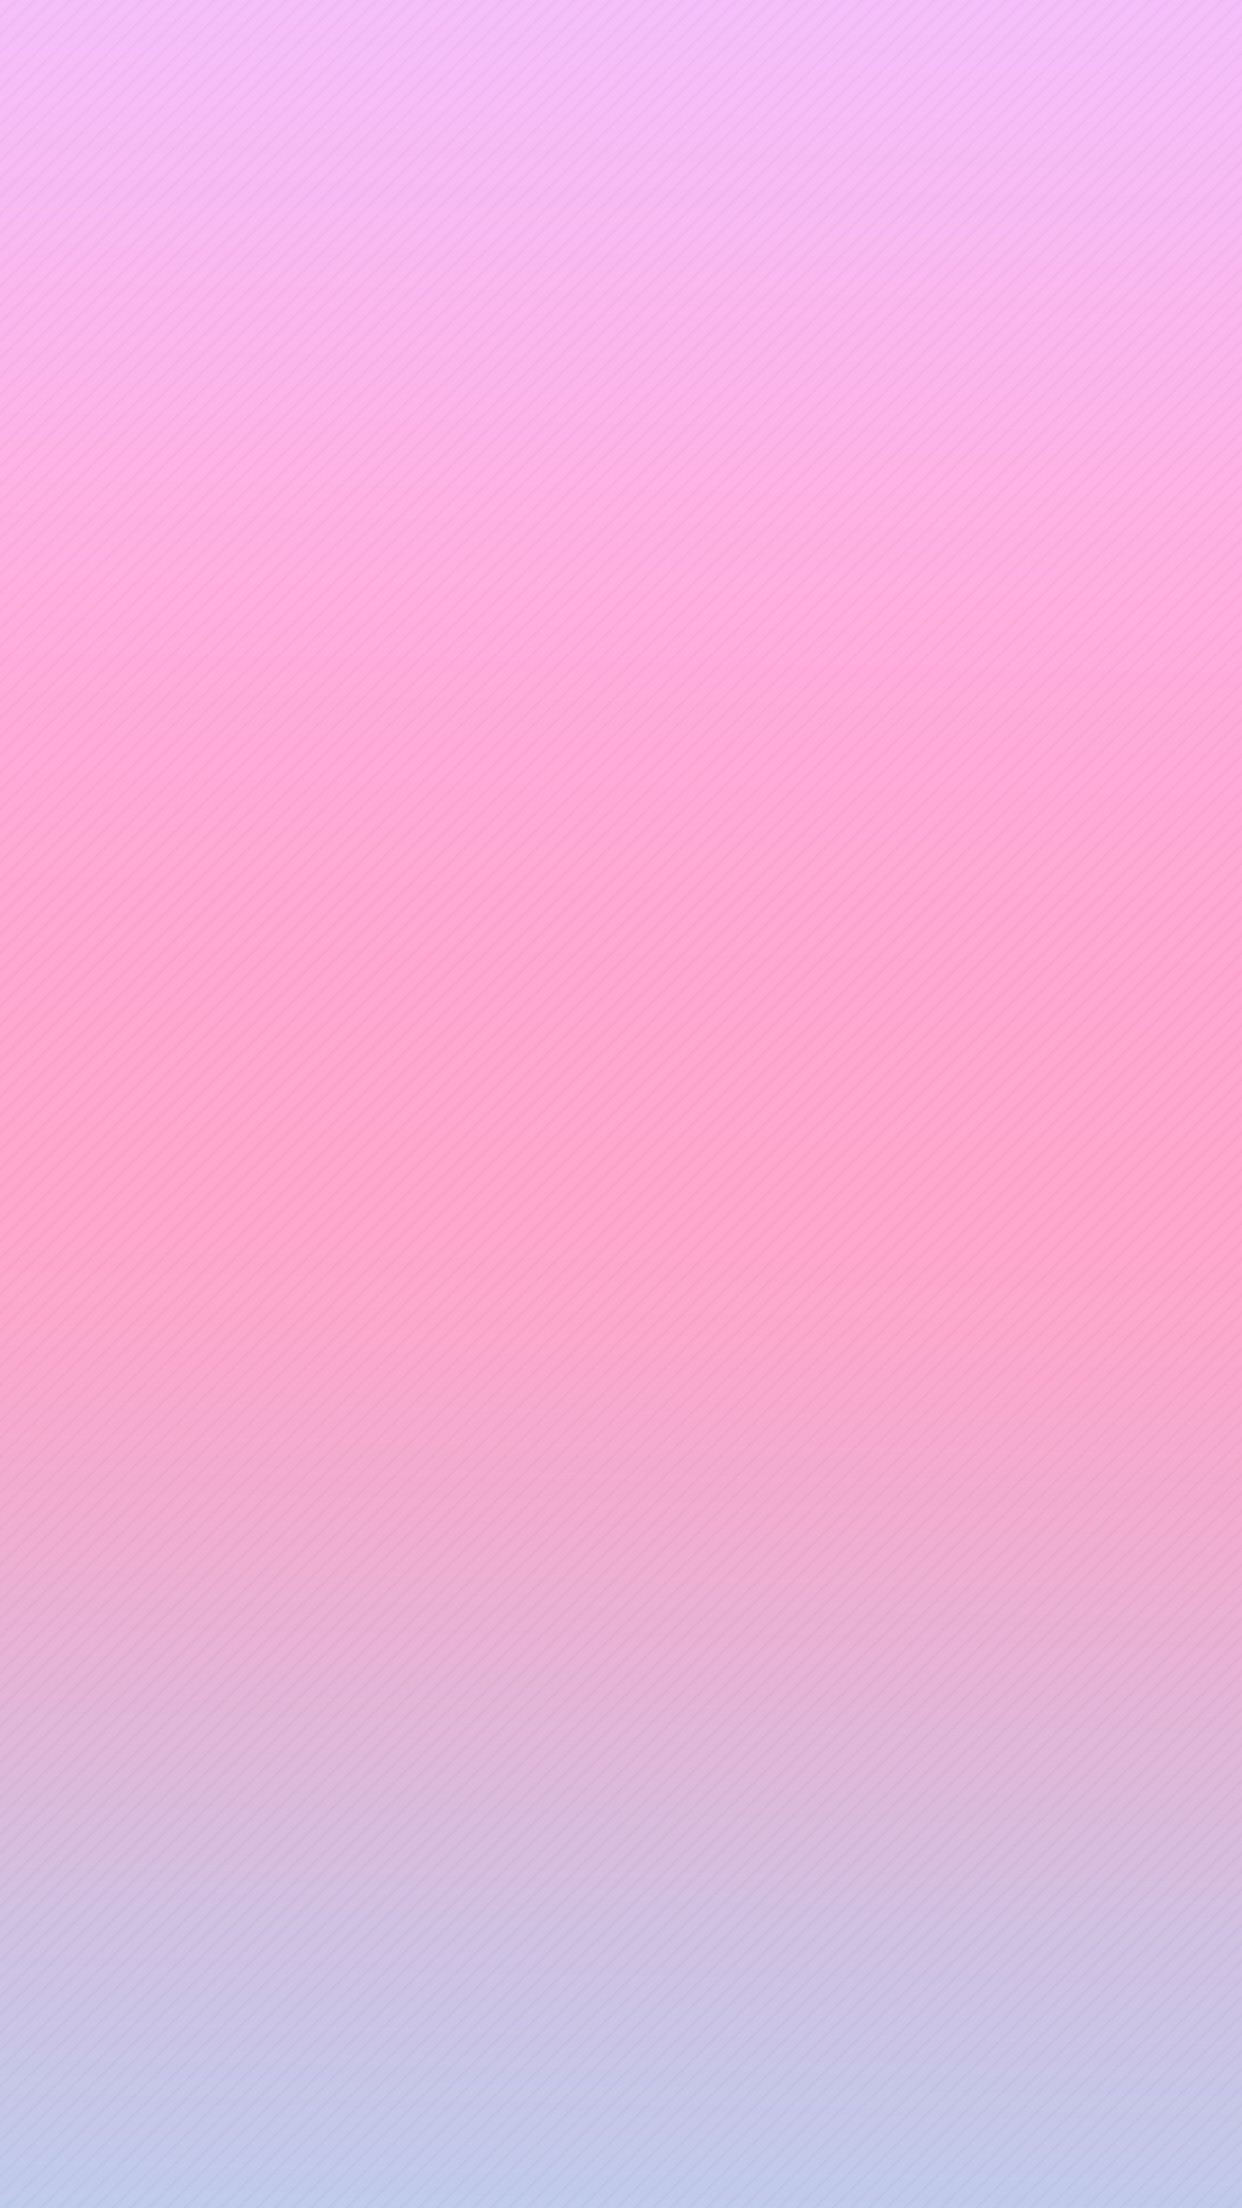 Wallpaper, background, iPhone, Android, HD, pink, purple, gradient,